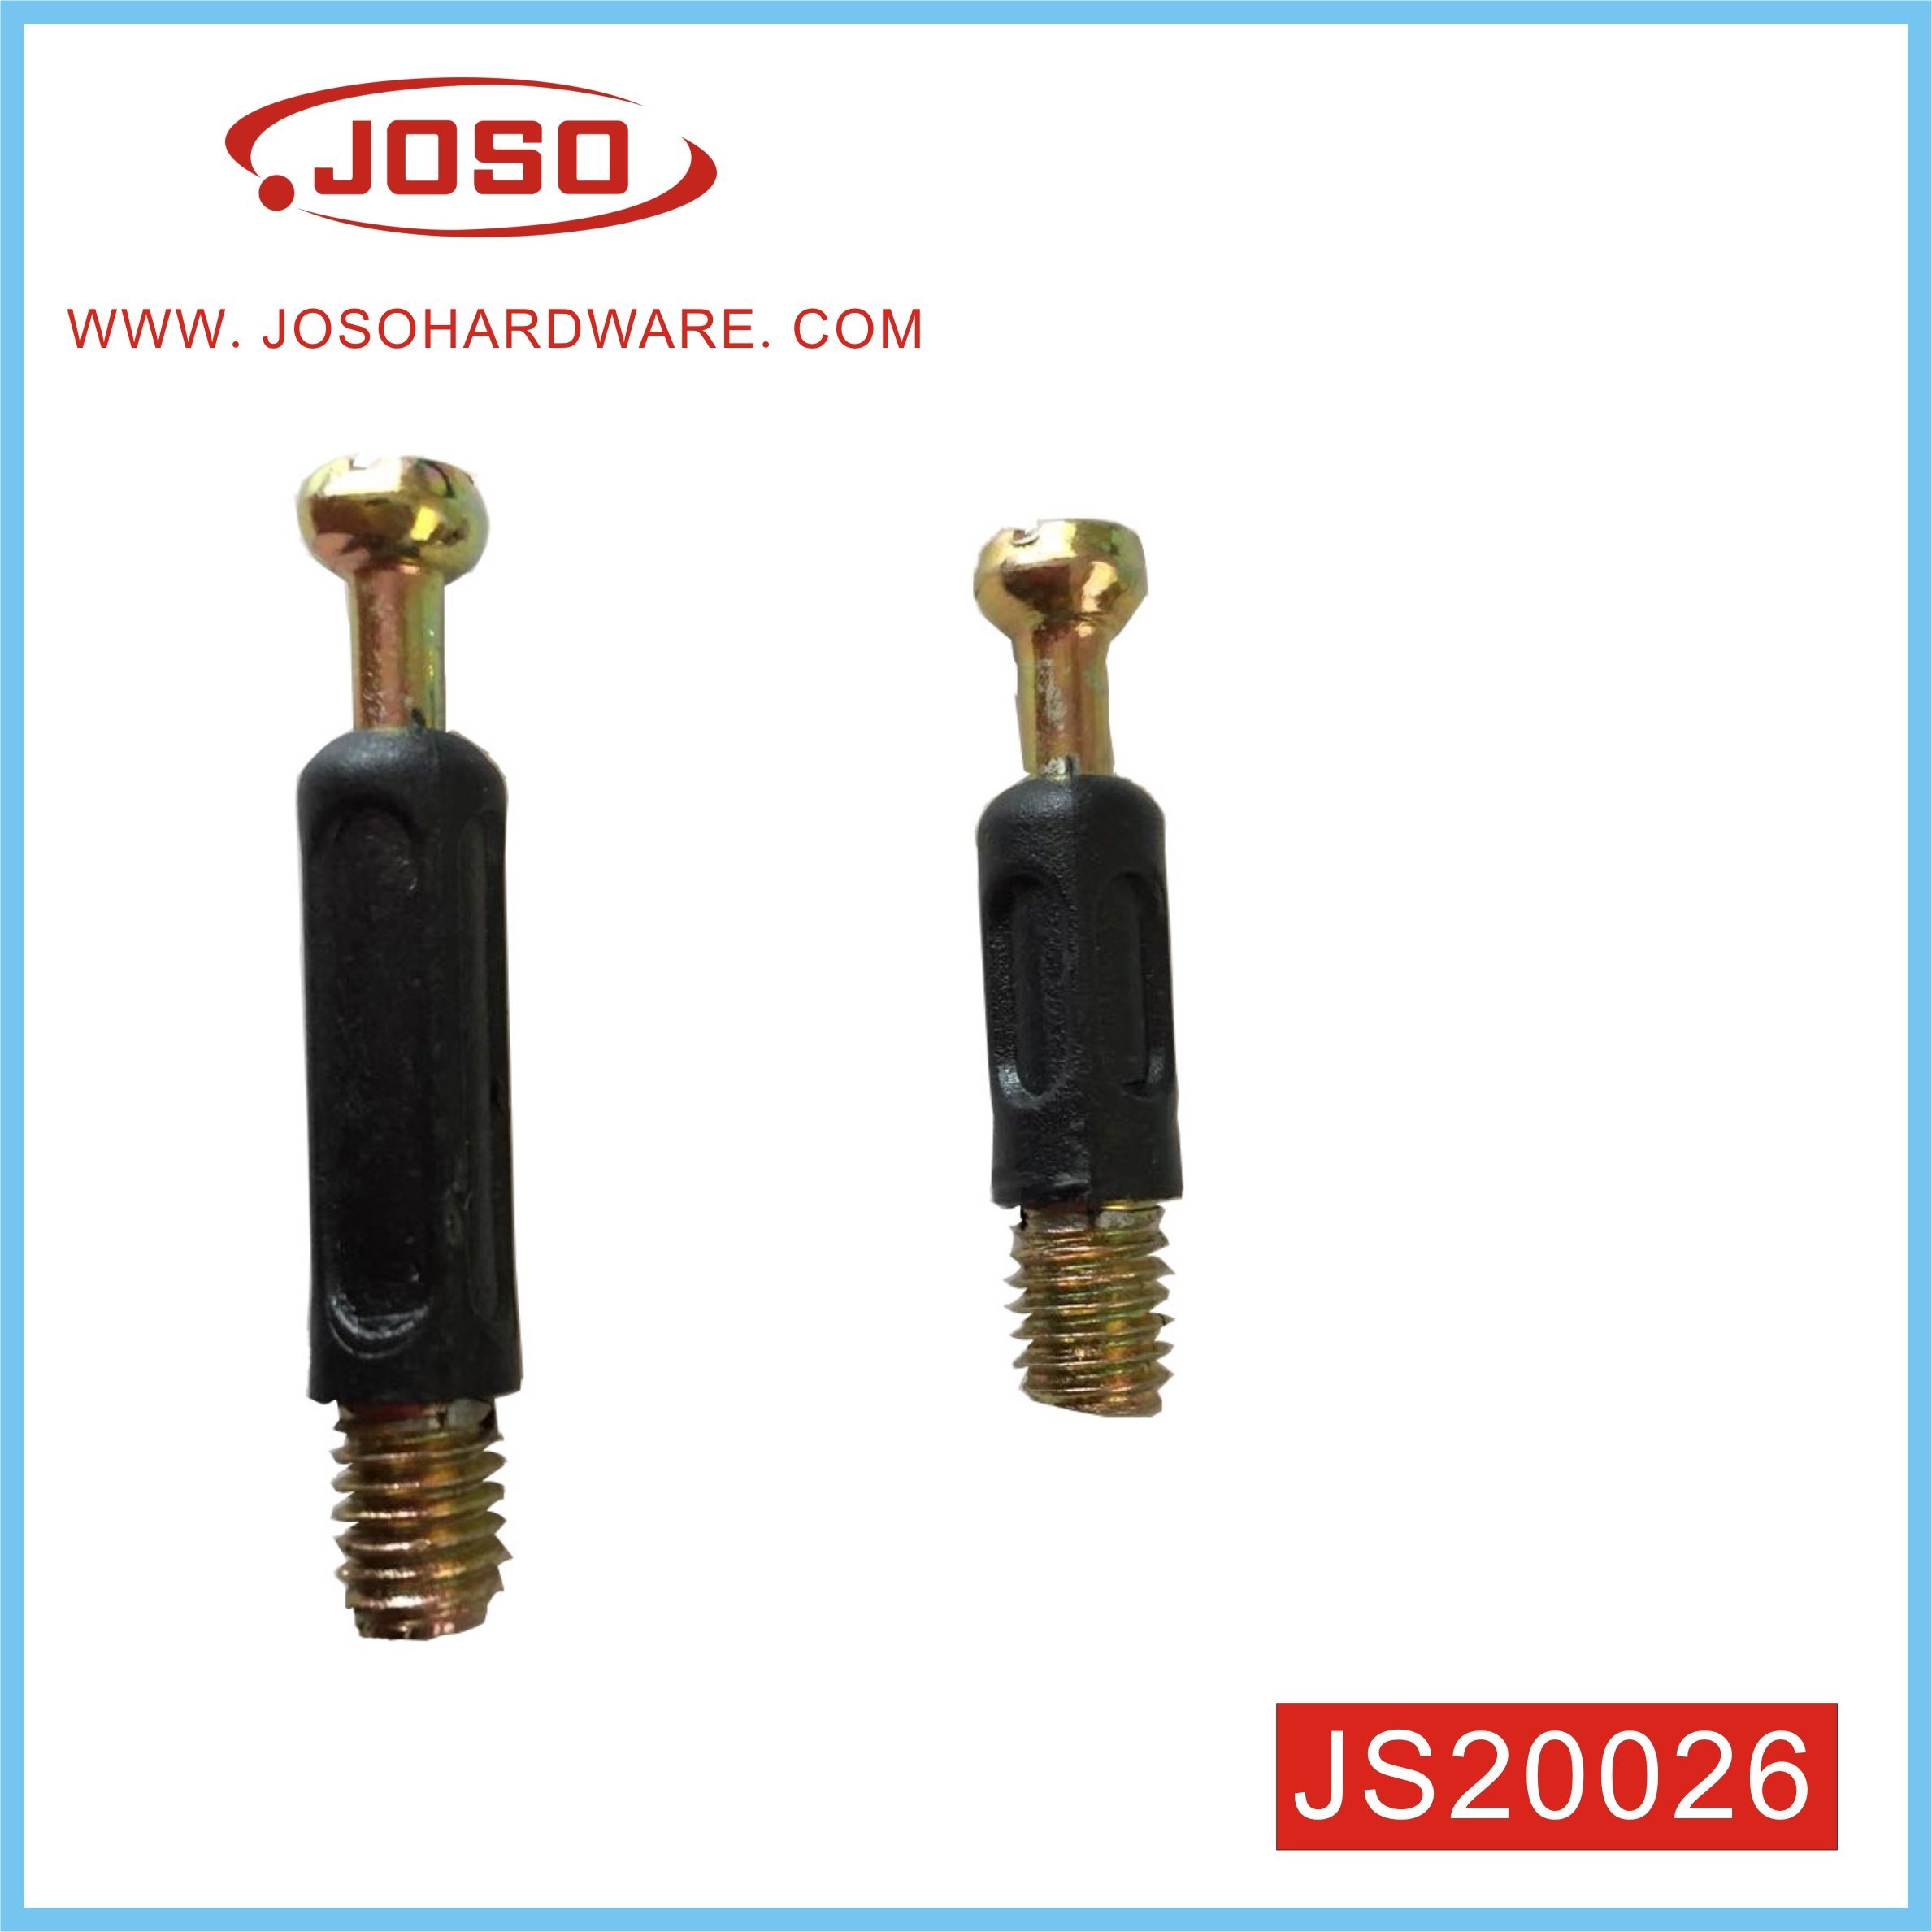 Factory Produce Steel and Plastic Home Furniture Bolt